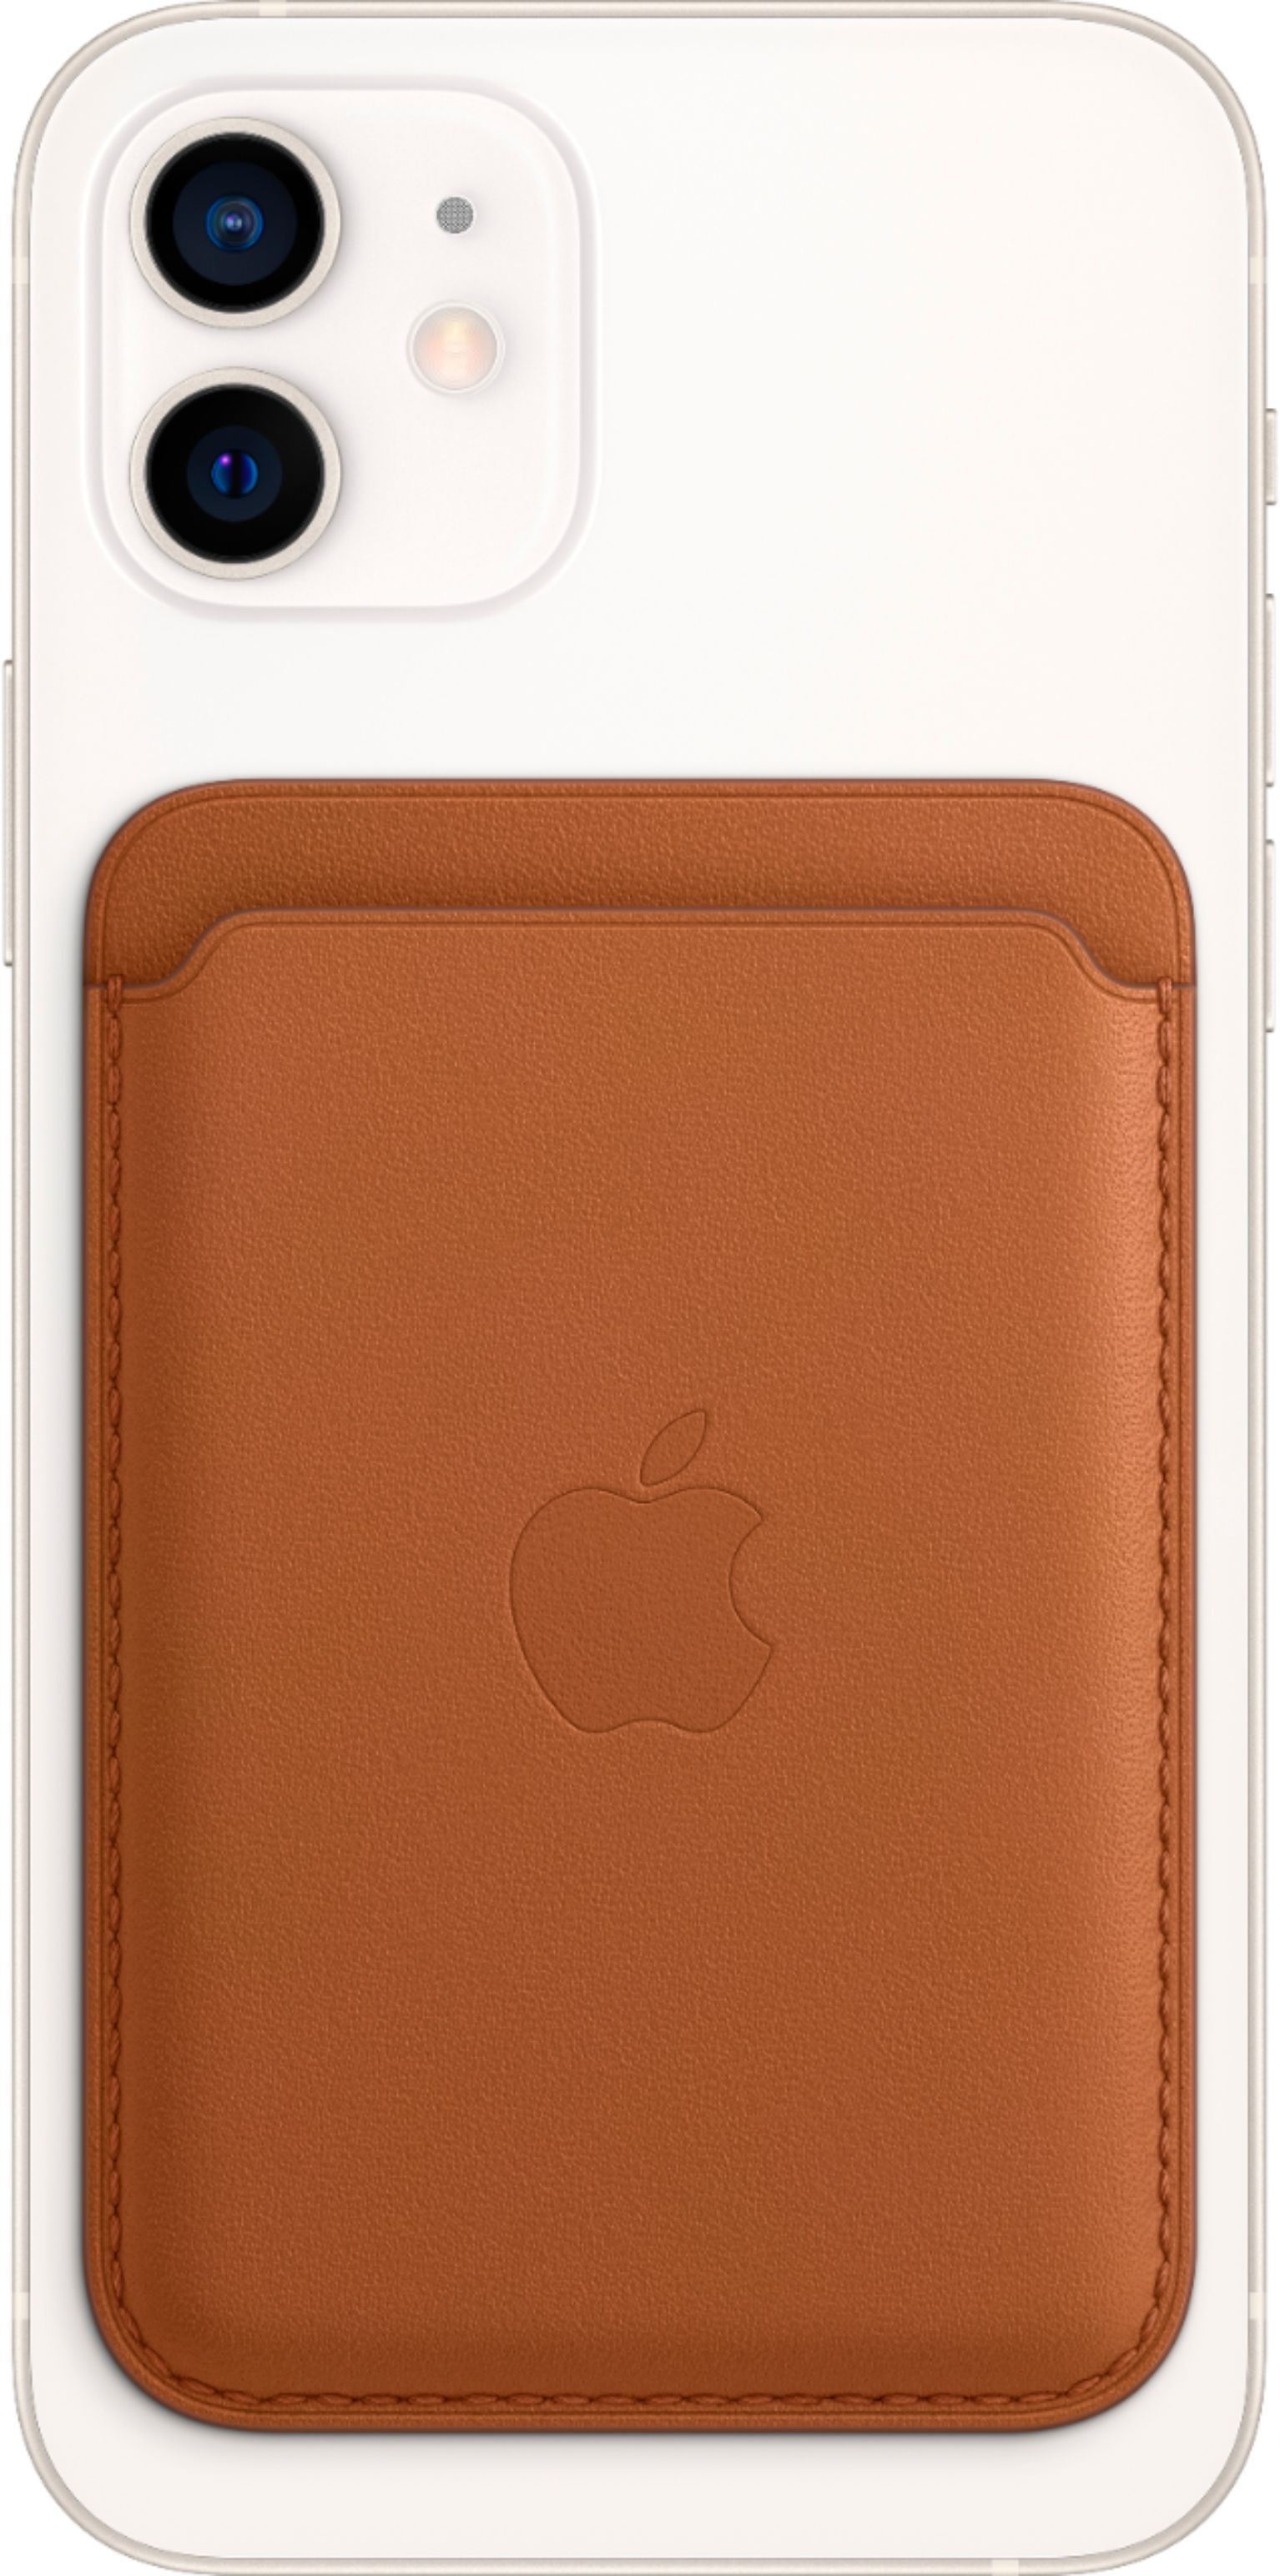 Apple's latest Leather MagSafe Wallet with Find My drops to $45 in